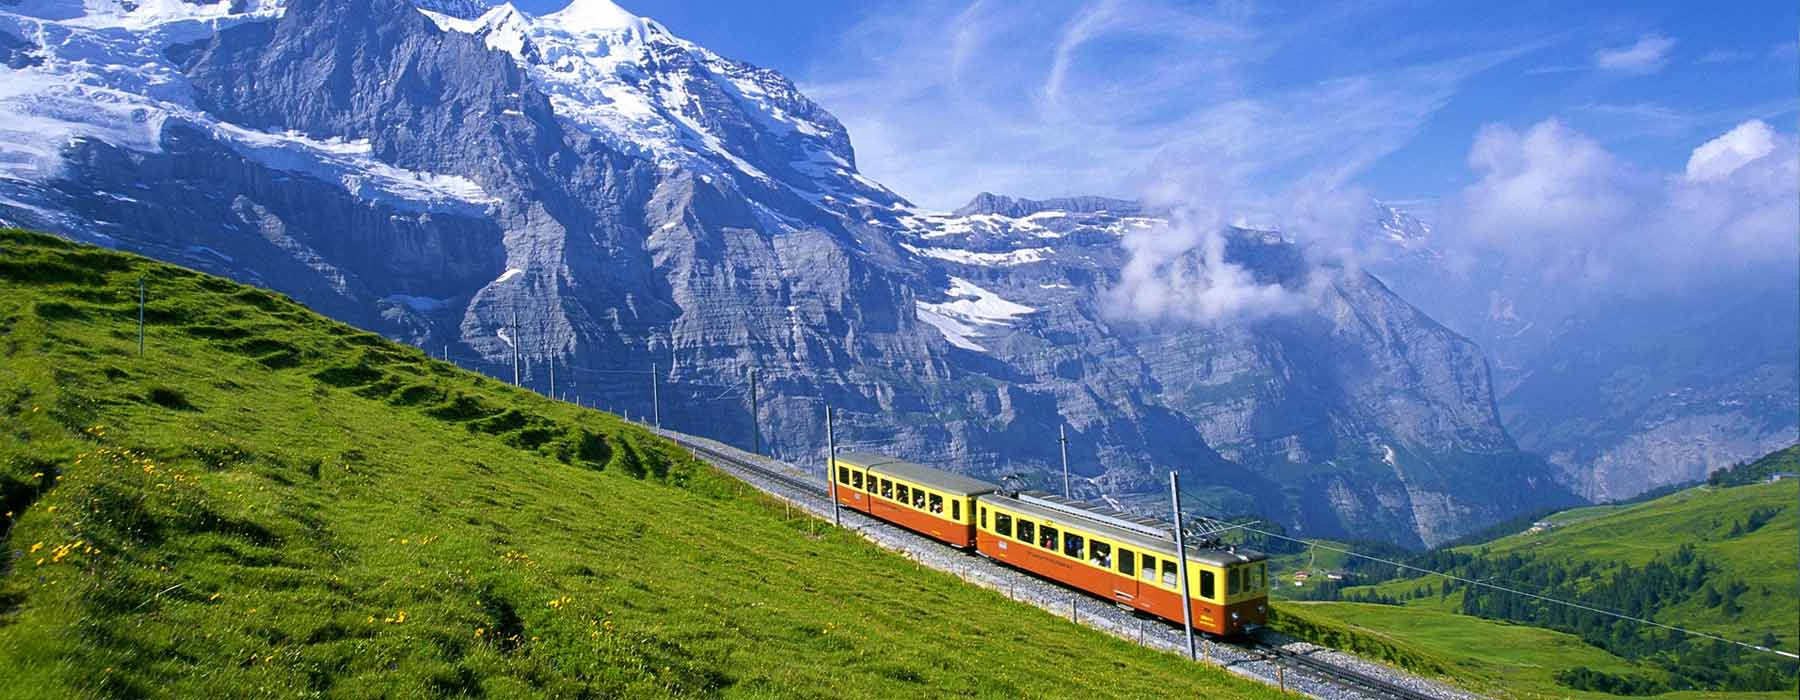 Siliguri to 𝗟𝗮𝗵𝗮𝘂𝗹 𝗦𝗽𝗶𝘁𝗶 tour package 9 nights 10 days by train  @ 18,903/- Rs